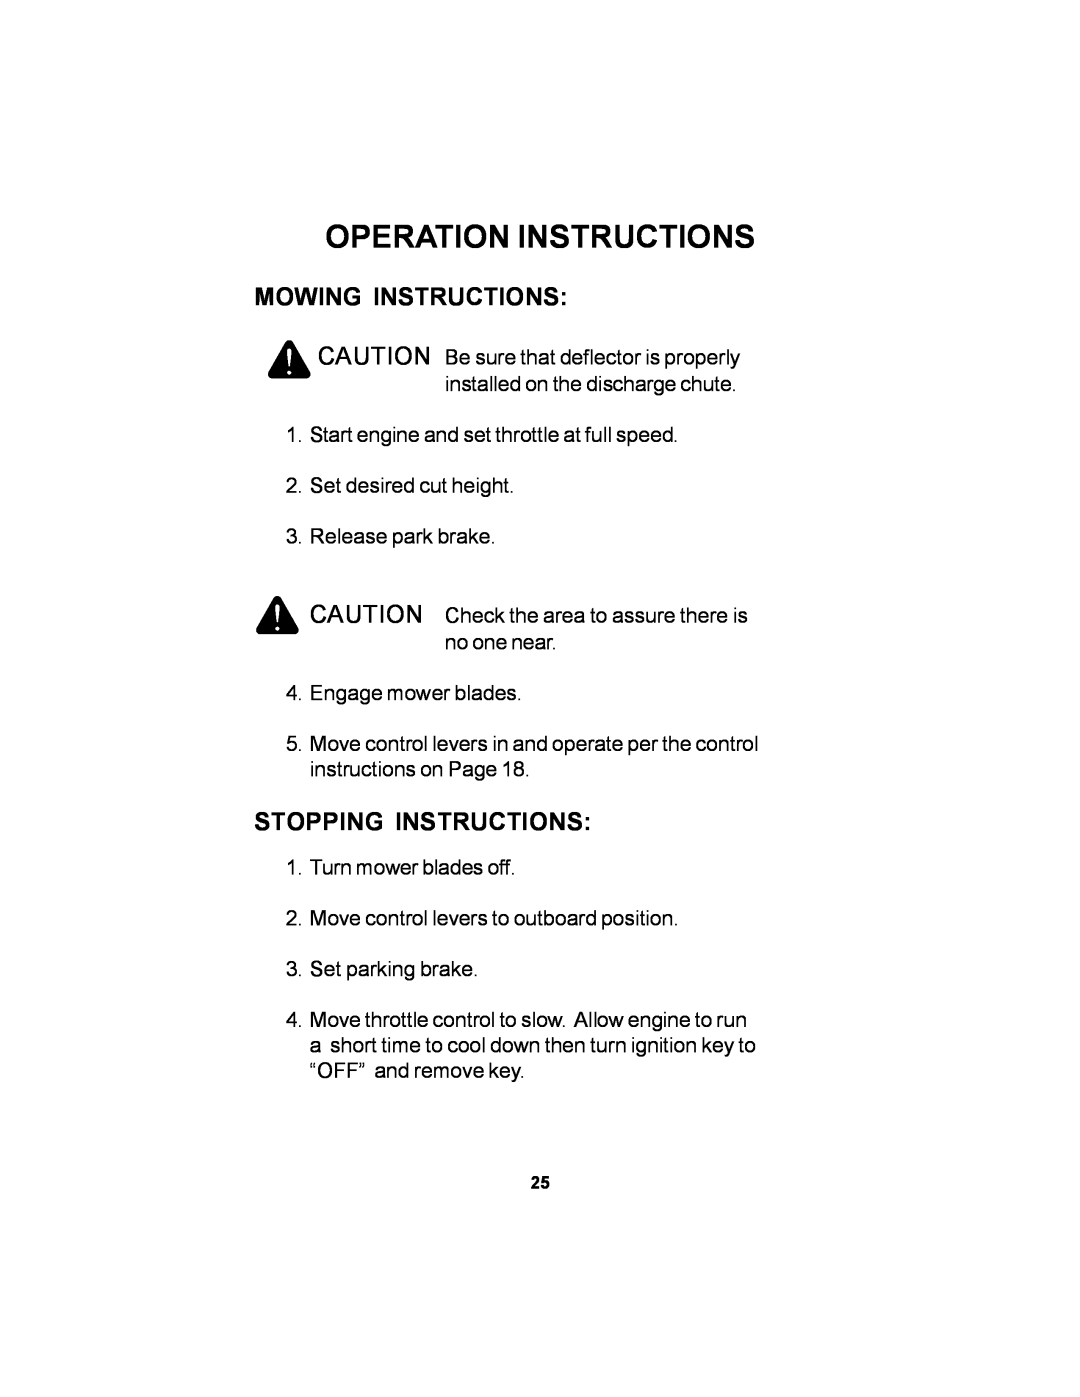 Dixon 12881-106 manual Mowing Instructions, Stopping Instructions, Operation Instructions 